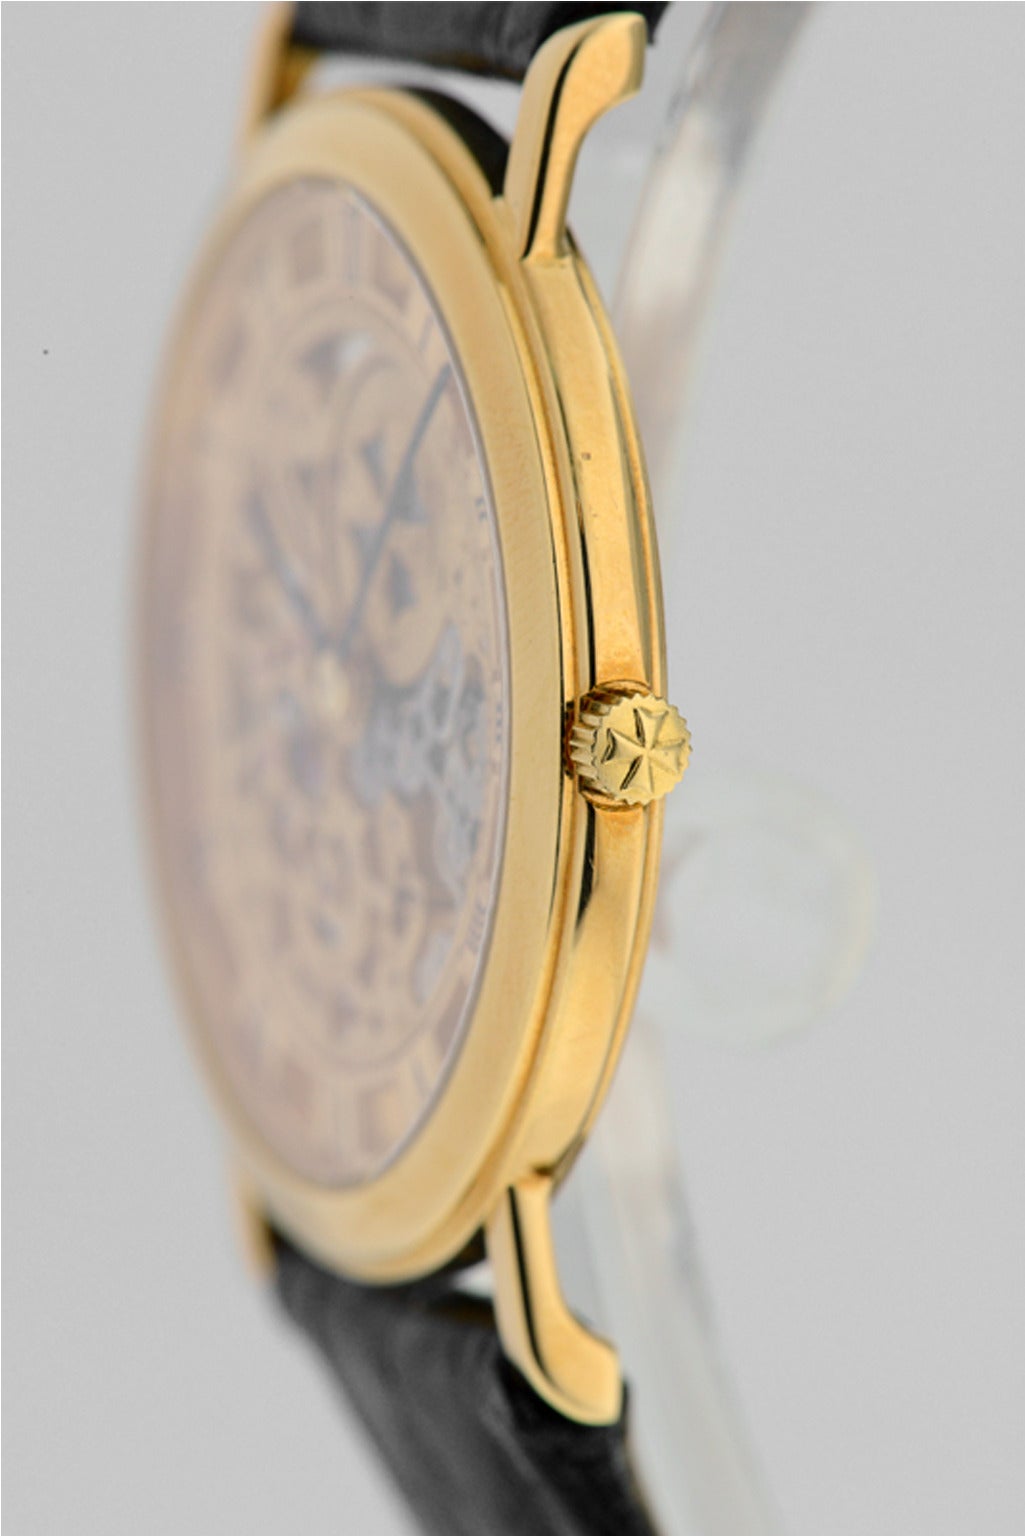 Gents Vacheron Constantin Skeletonized watch in 18K yellow gold, Ref#33115/000J/8385. On original reptile strap with original 18K yellow gold tang buckle, snap on caseback, 33mm case diameter. Manual winding movement. Skeletonized dial with painted